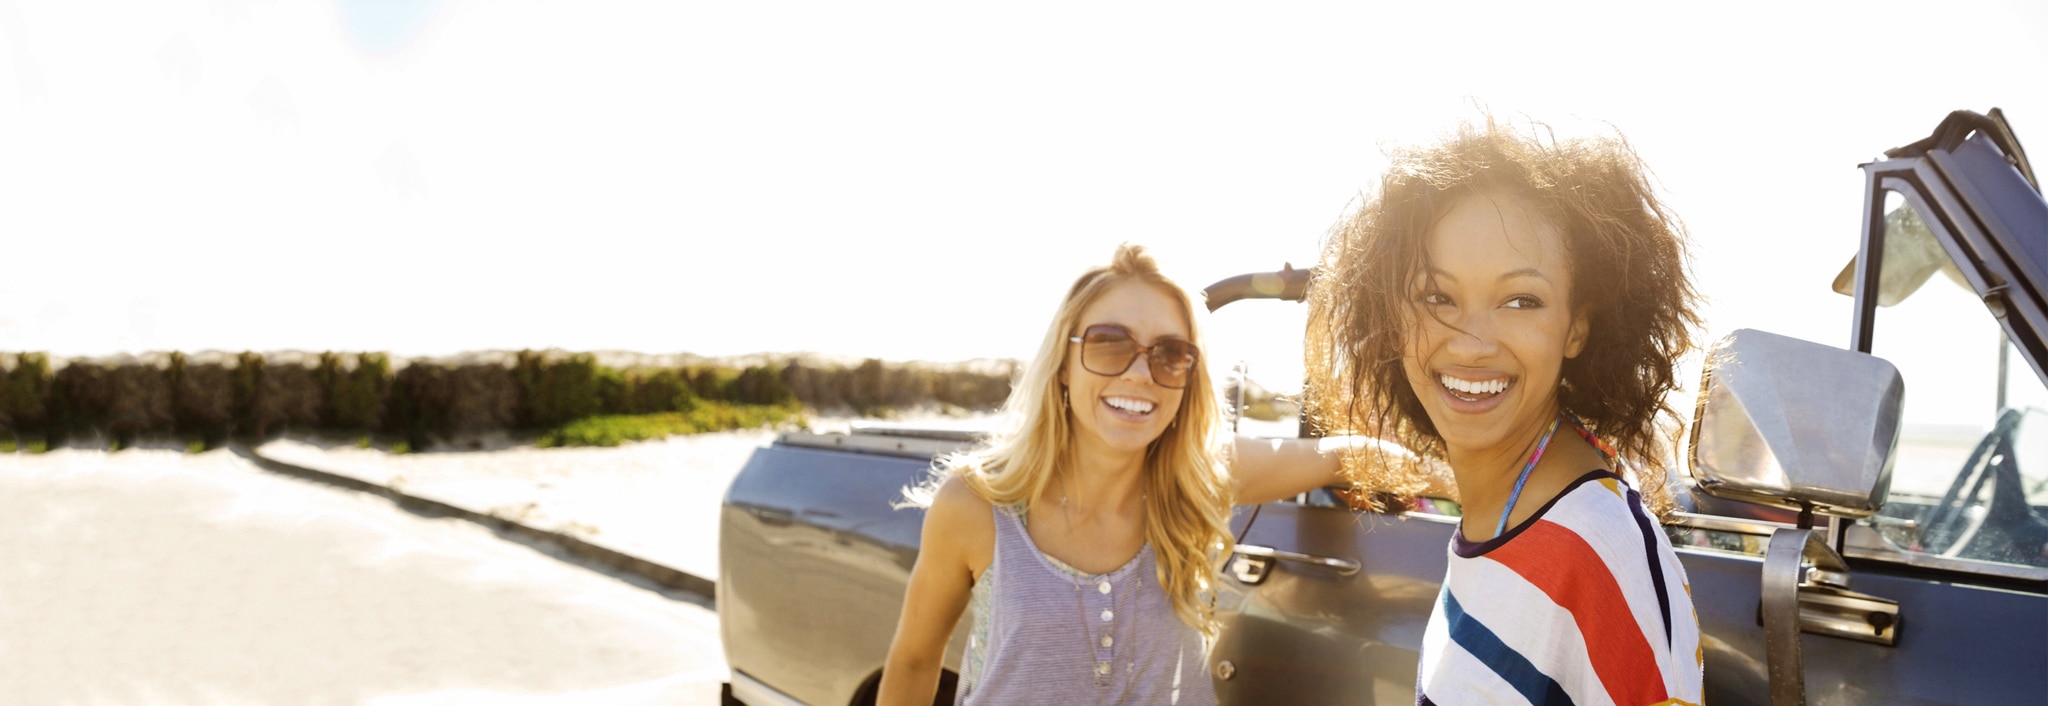 Two women smiling, one with smooth dry hair and the other with curly dry hair, near a car.